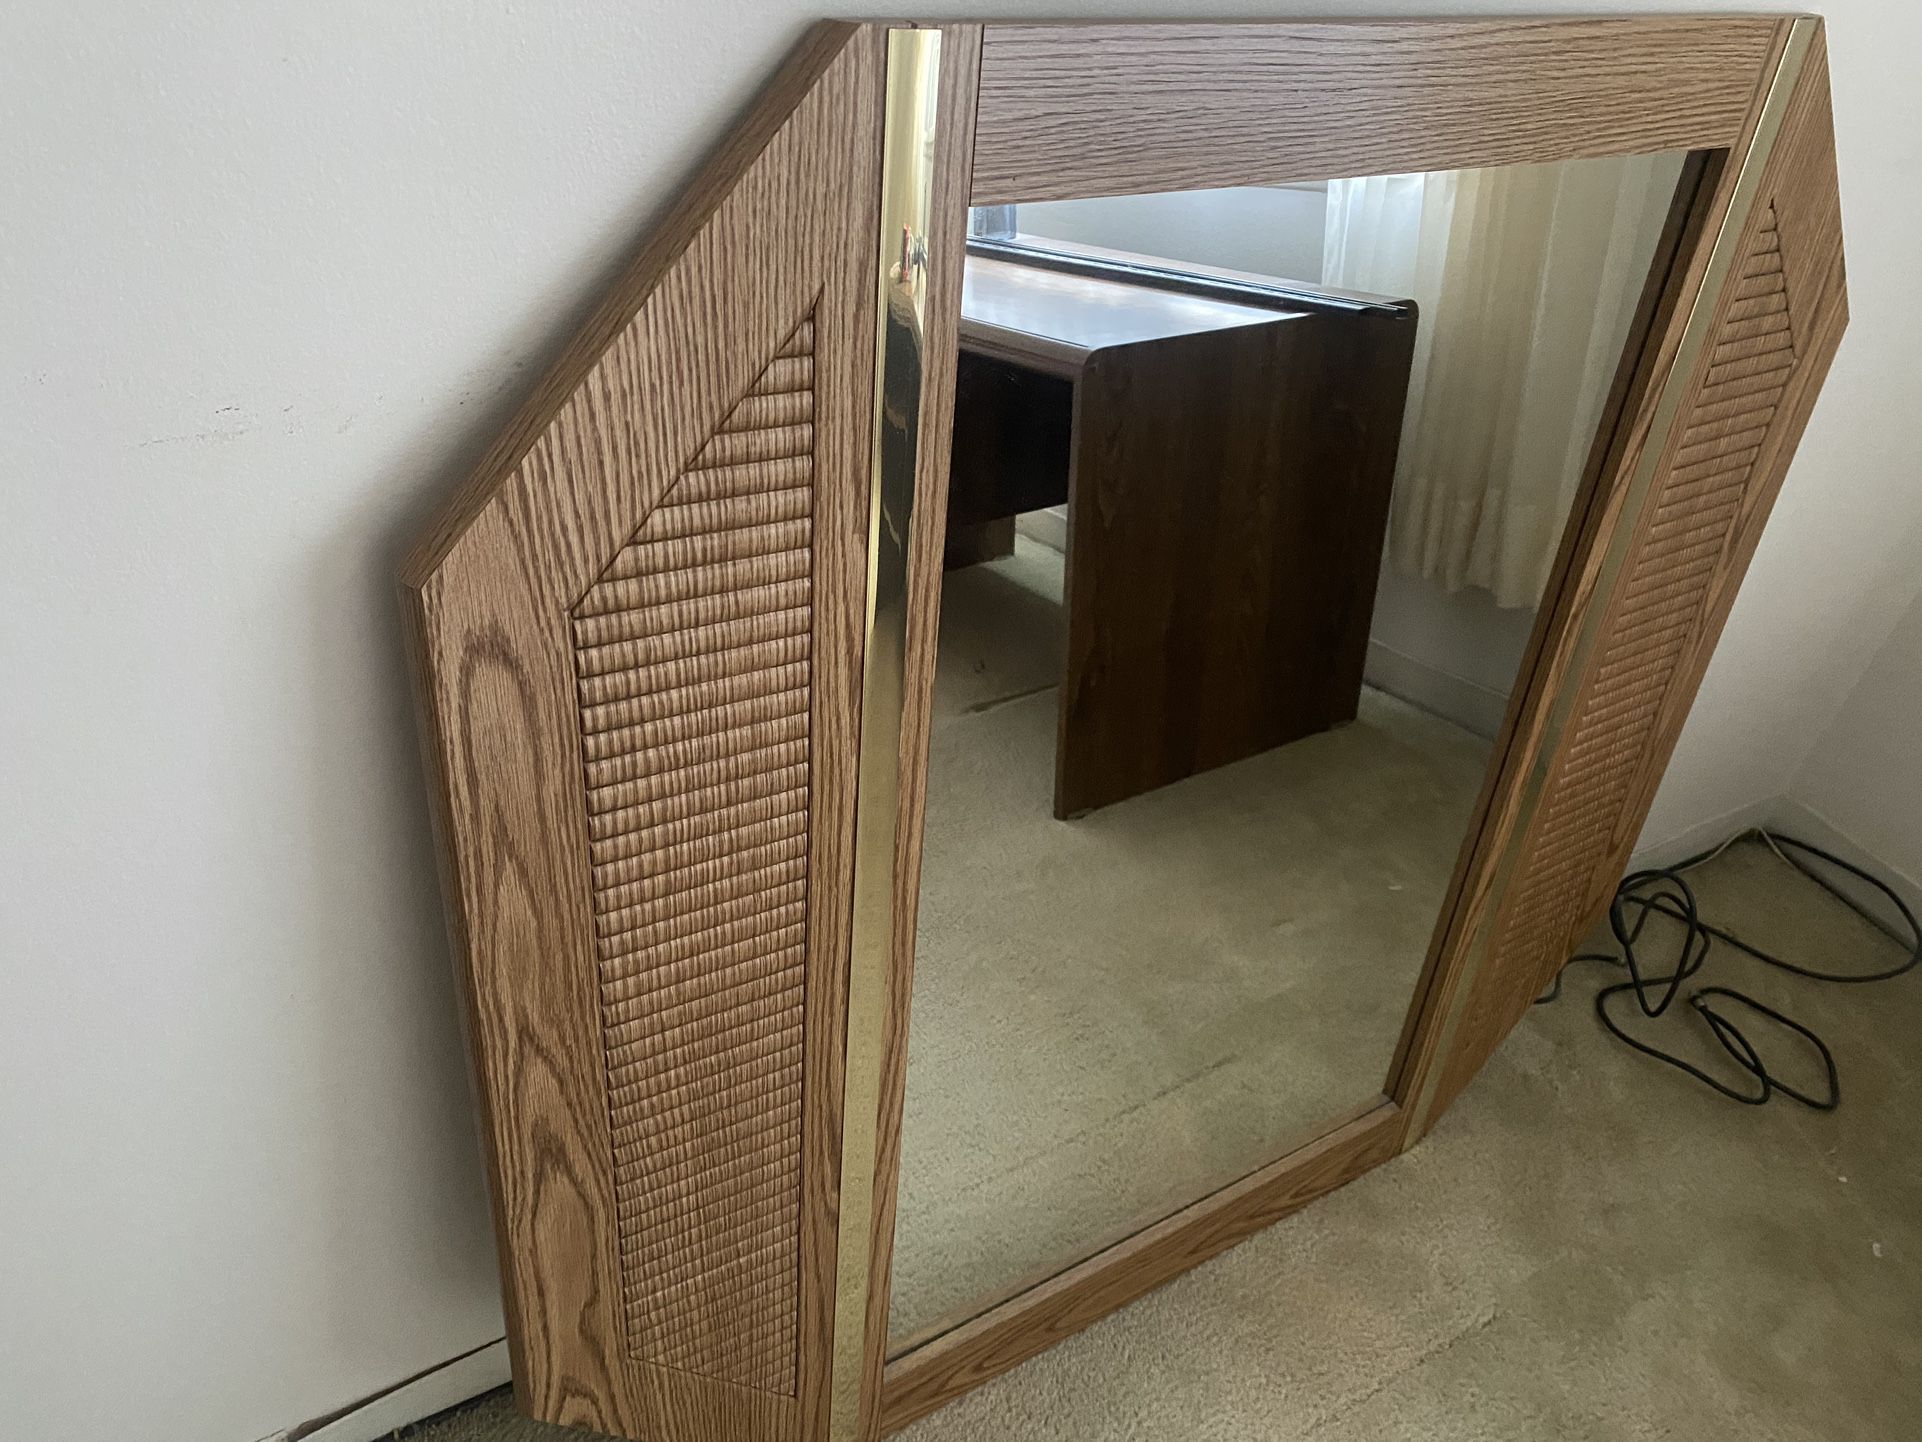 A mirror for the chest of drawers or on the wall